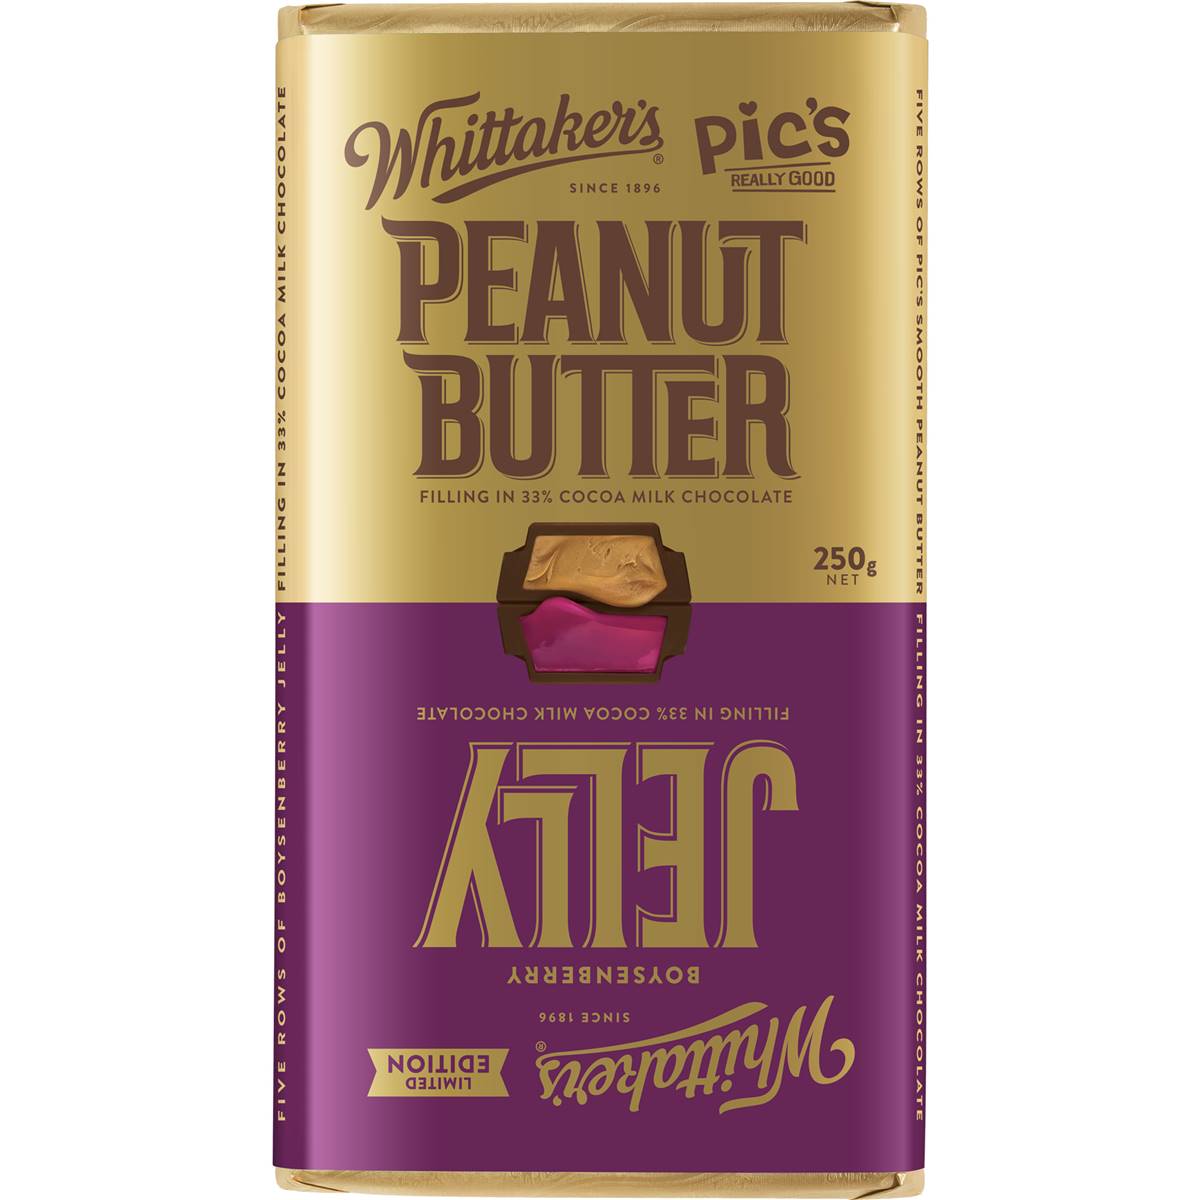 Calories in Whittaker's Peanut Butter & Jelly Chocolate Block